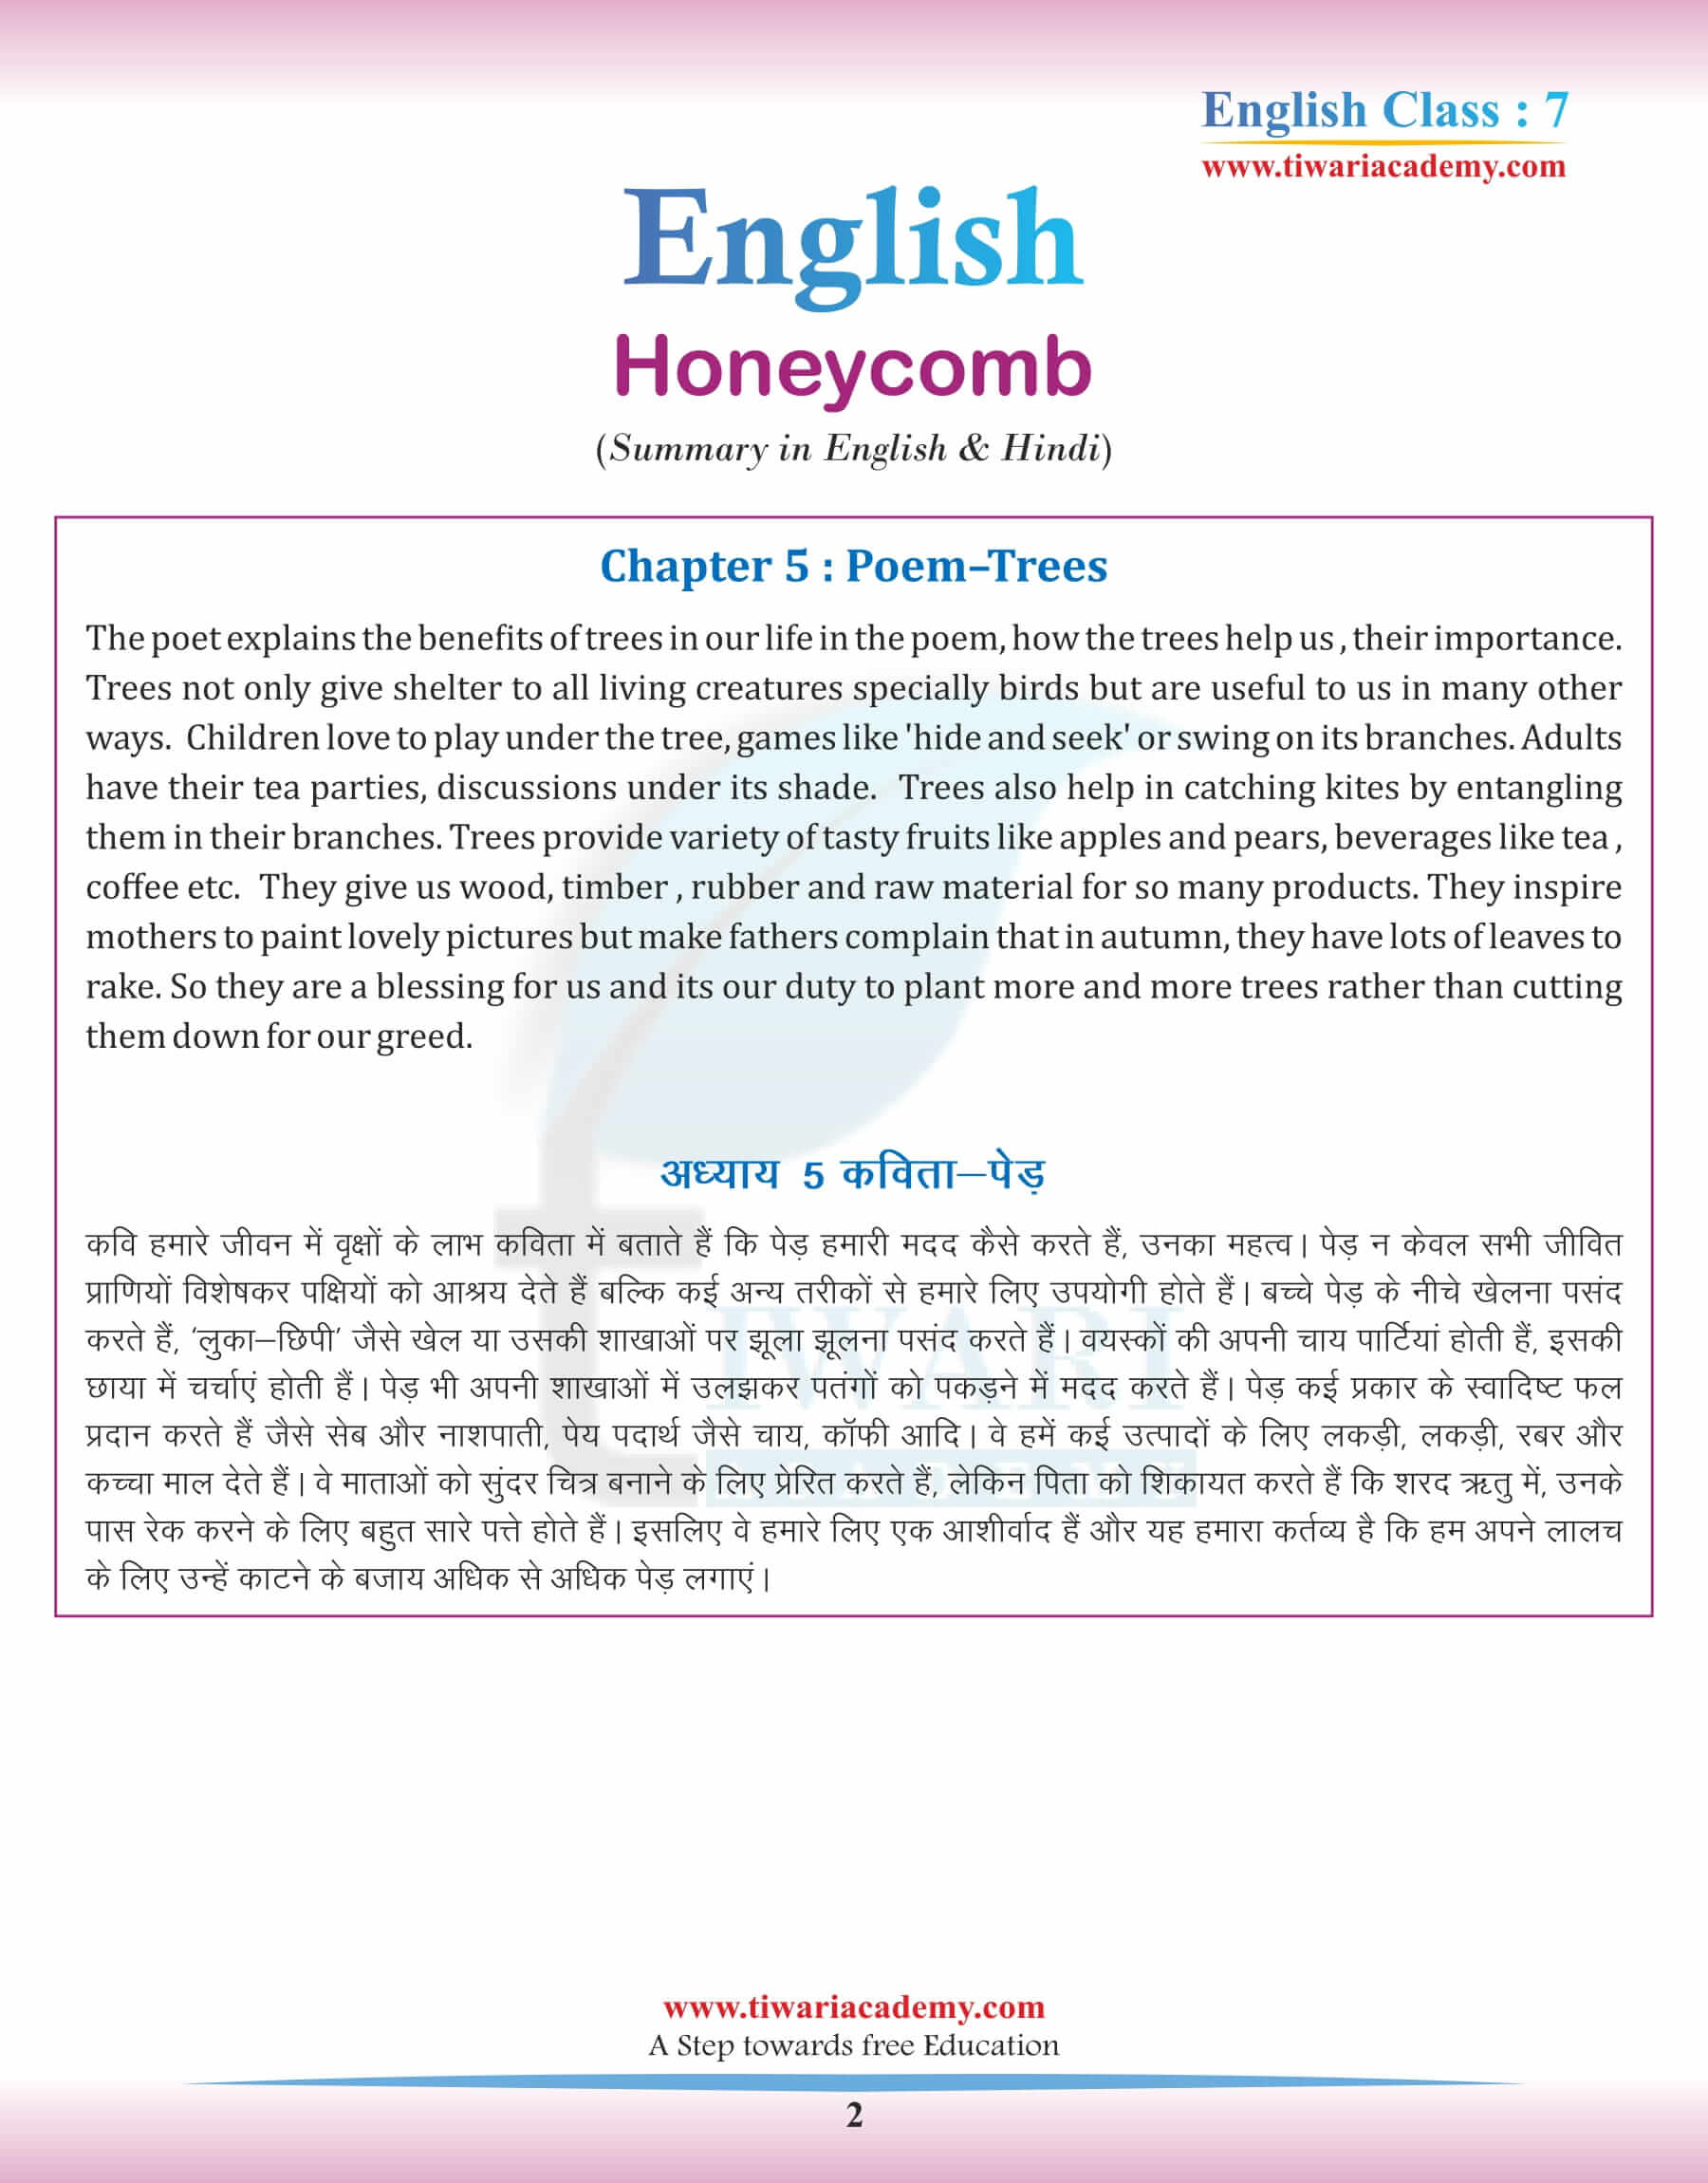 Class 7 English Chapter 5 Poem Summary in Hindi and English